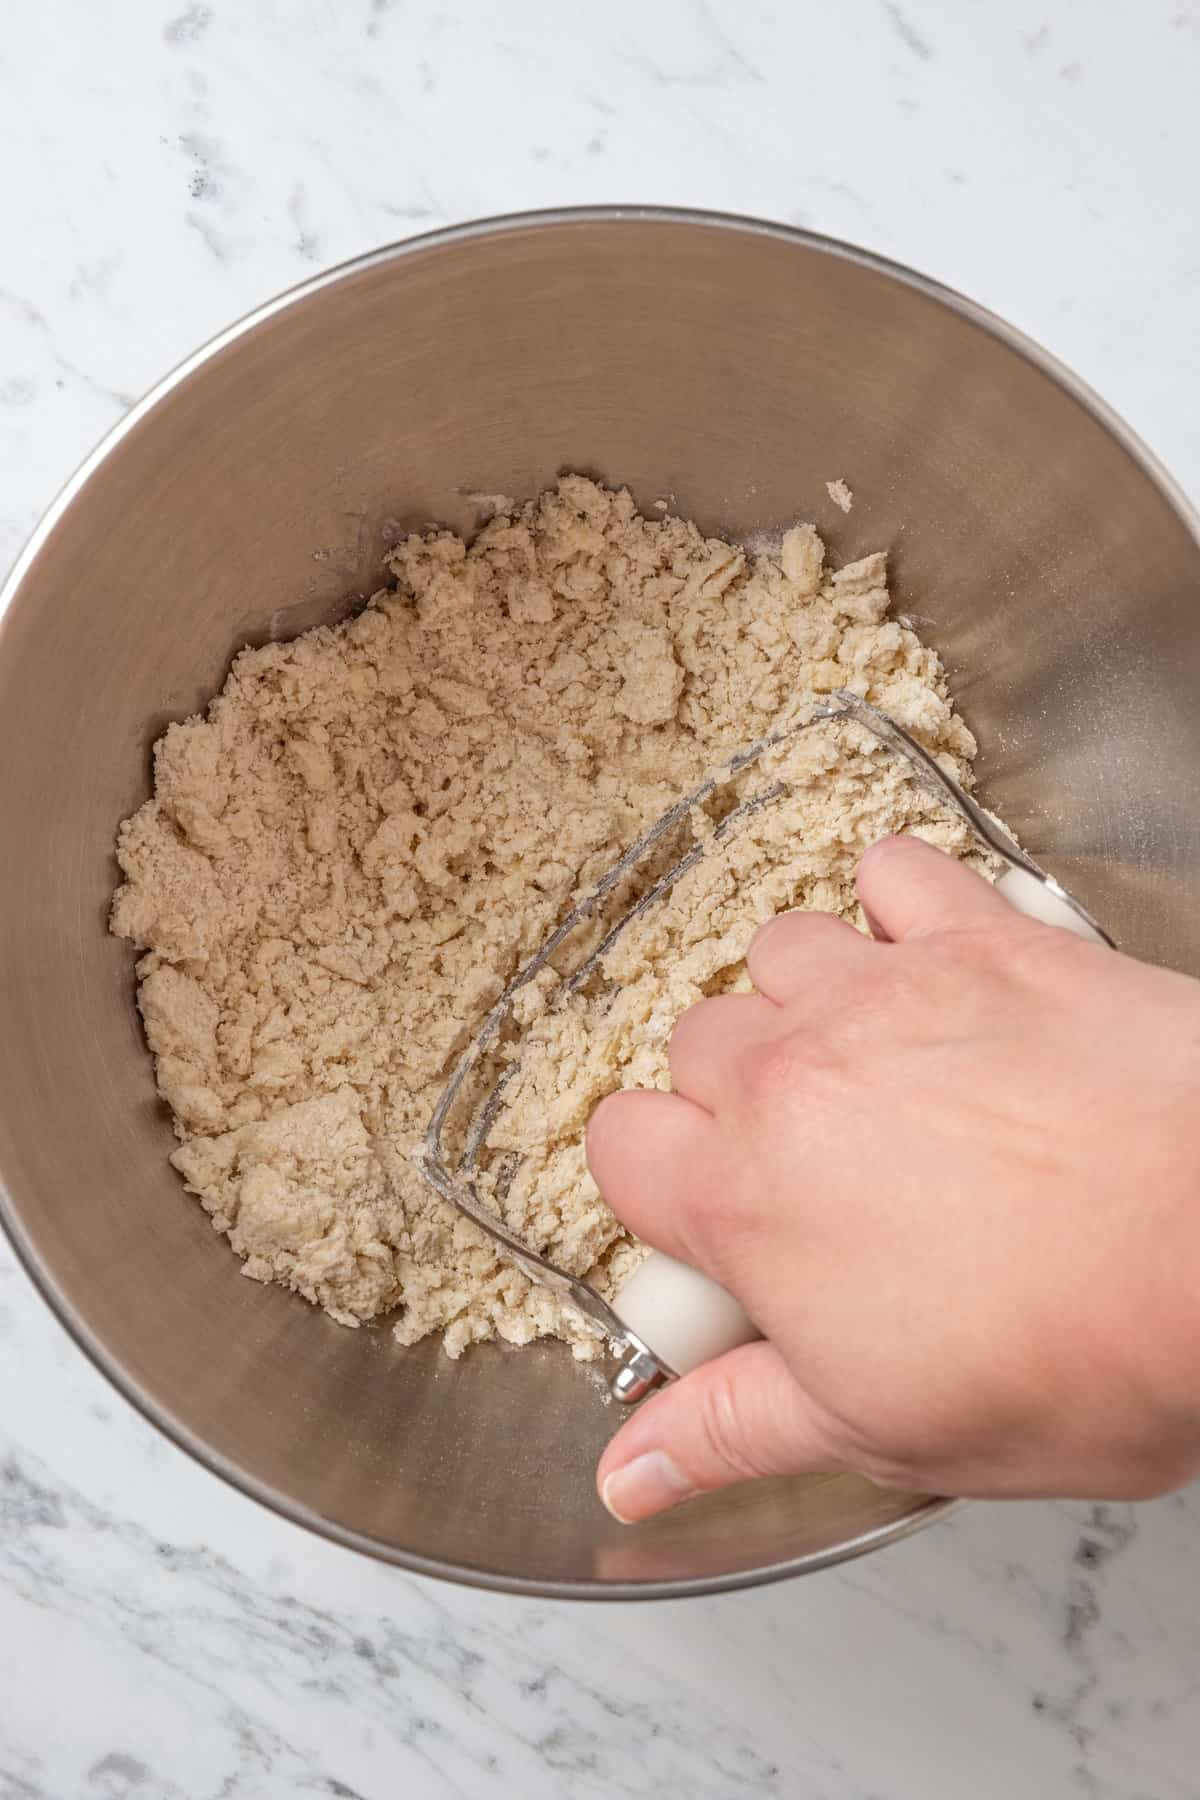 A hand uses a pastry cutter to cut butter into the dry dough ingredients in a mixing bowl.